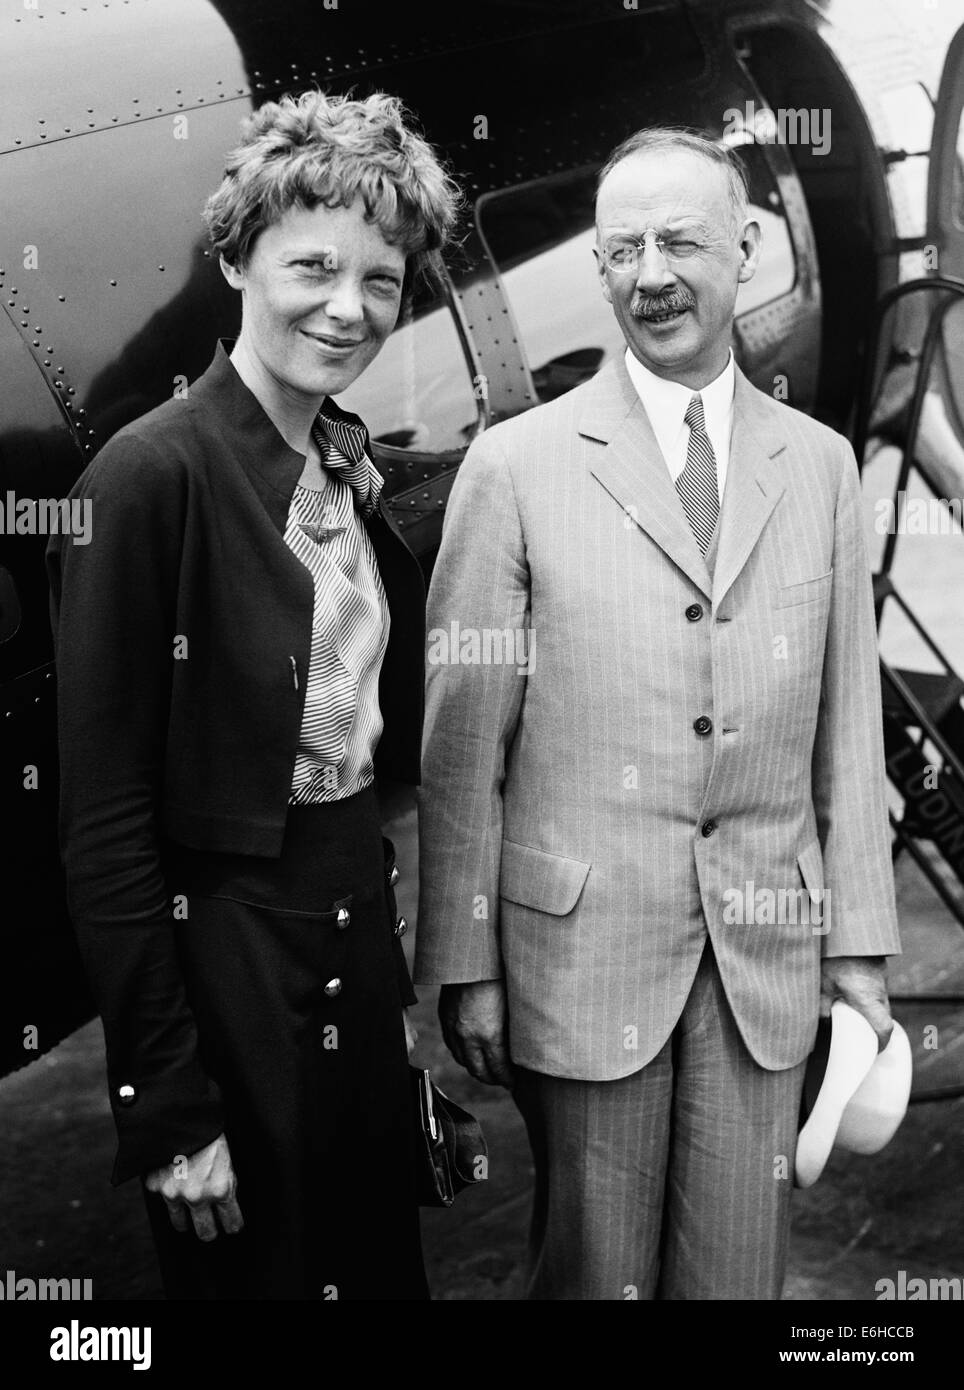 Vintage photo of American aviation pioneer and author Amelia Earhart (1897 – declared dead 1939) – Earhart and her navigator Fred Noonan famously vanished in 1937 while she was trying to become the first female to complete a circumnavigational flight of the globe. Earhart is pictured in 1932 with Gilbert Grosvenor, Editor of National Geographic magazine and President of the National Geographic Society. Stock Photo